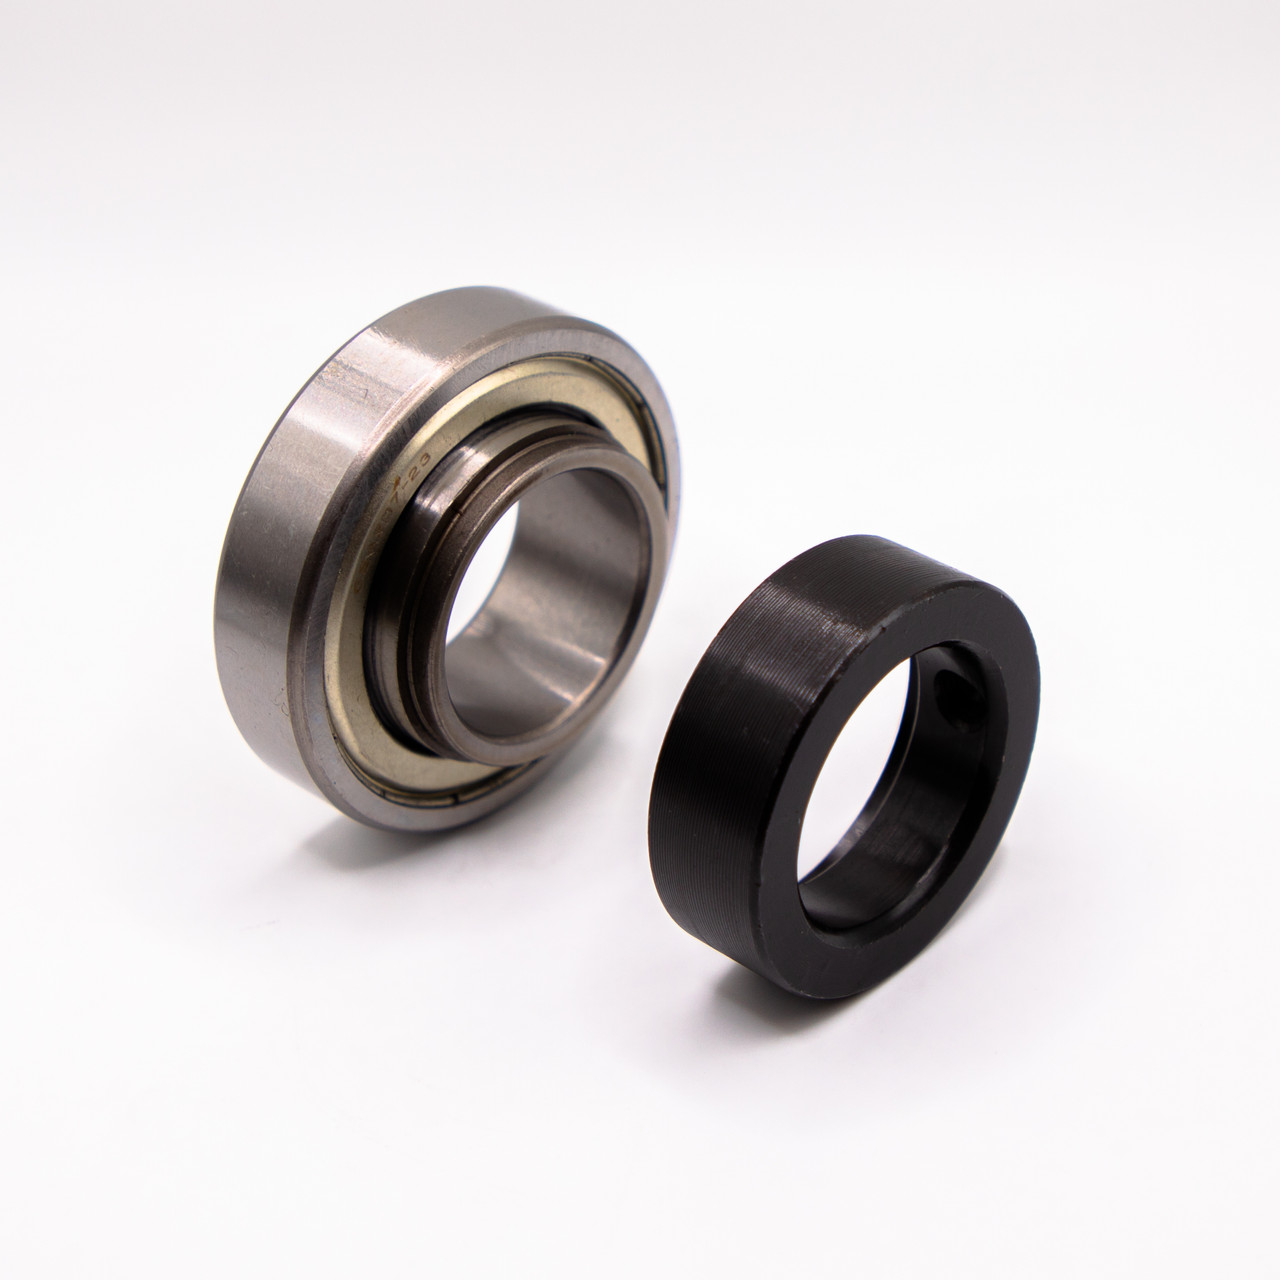 CSA202-9 Insert Ball Bearing 9/16x40x28.6 Separated Side View